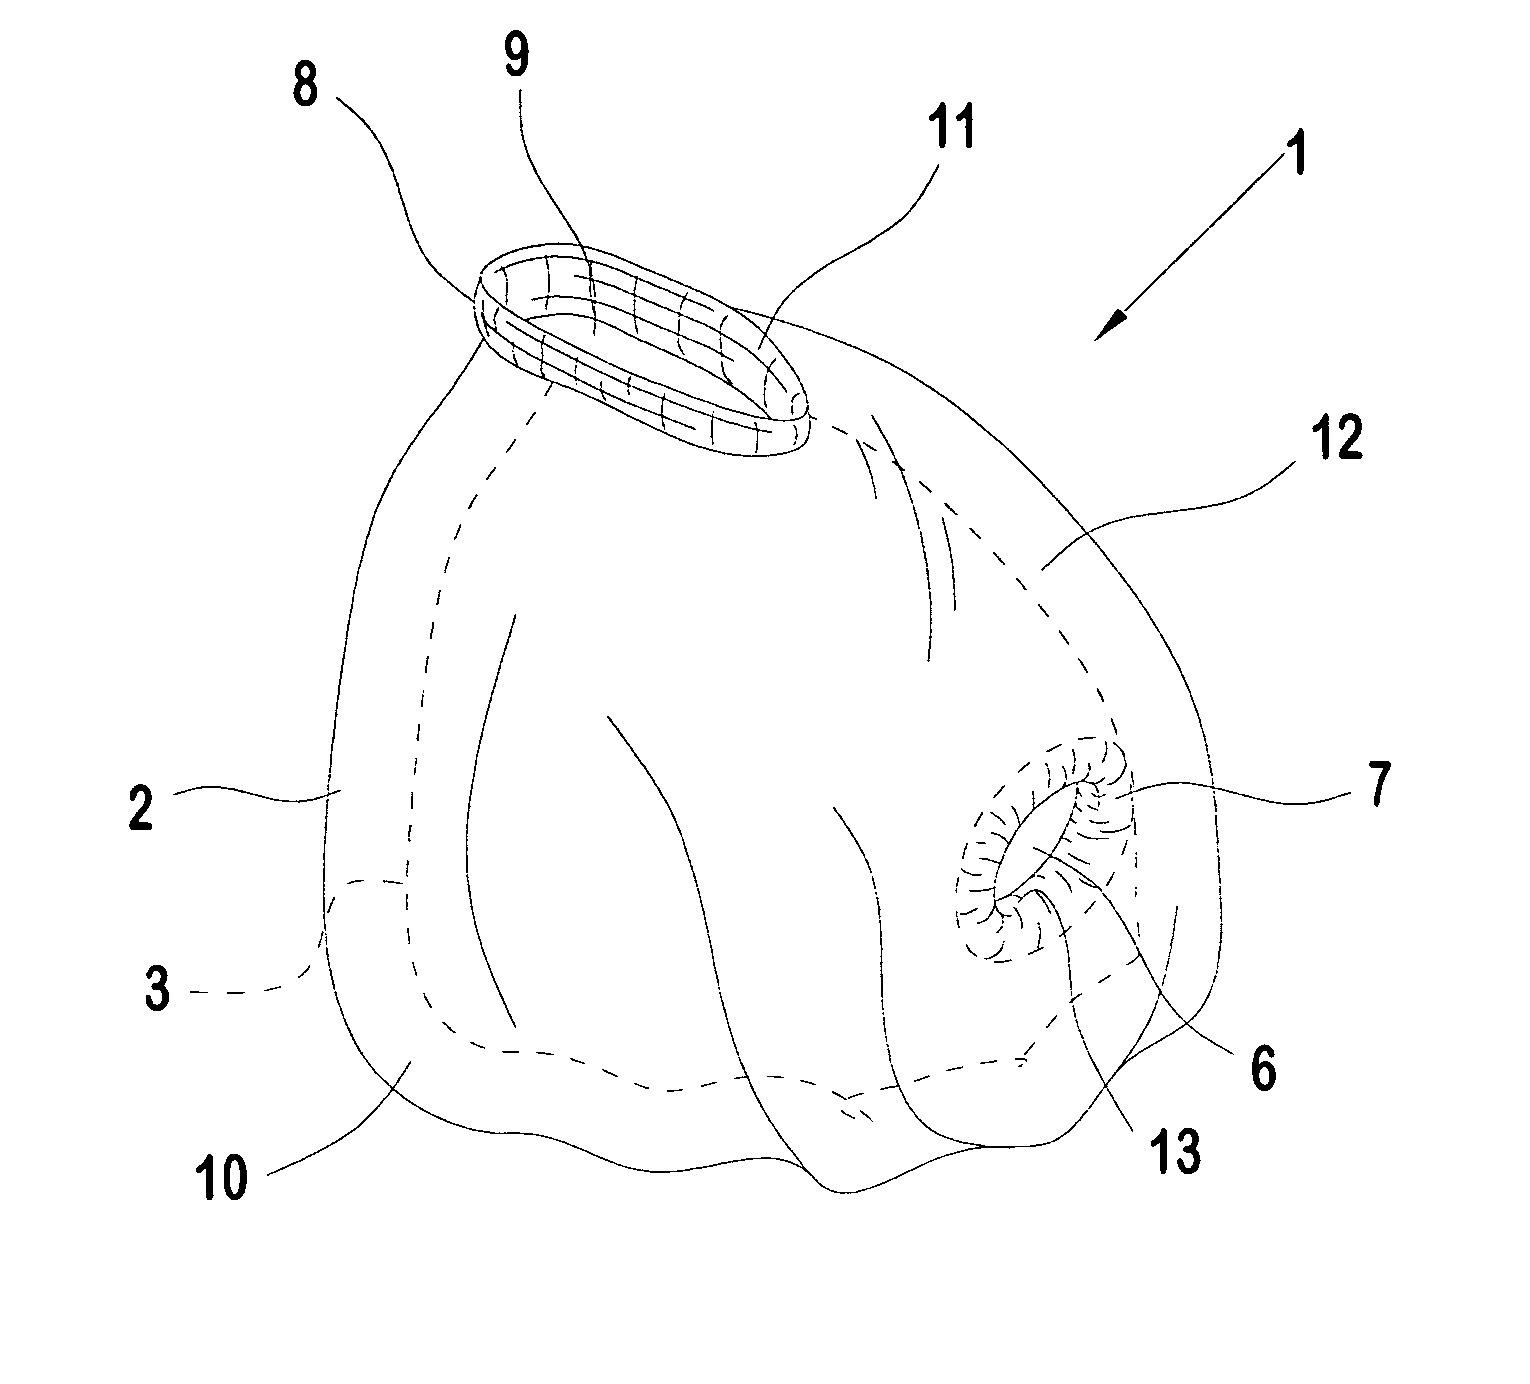 Disposable urinary collection device having elastic penis opening orthogonal to elastic hand opening